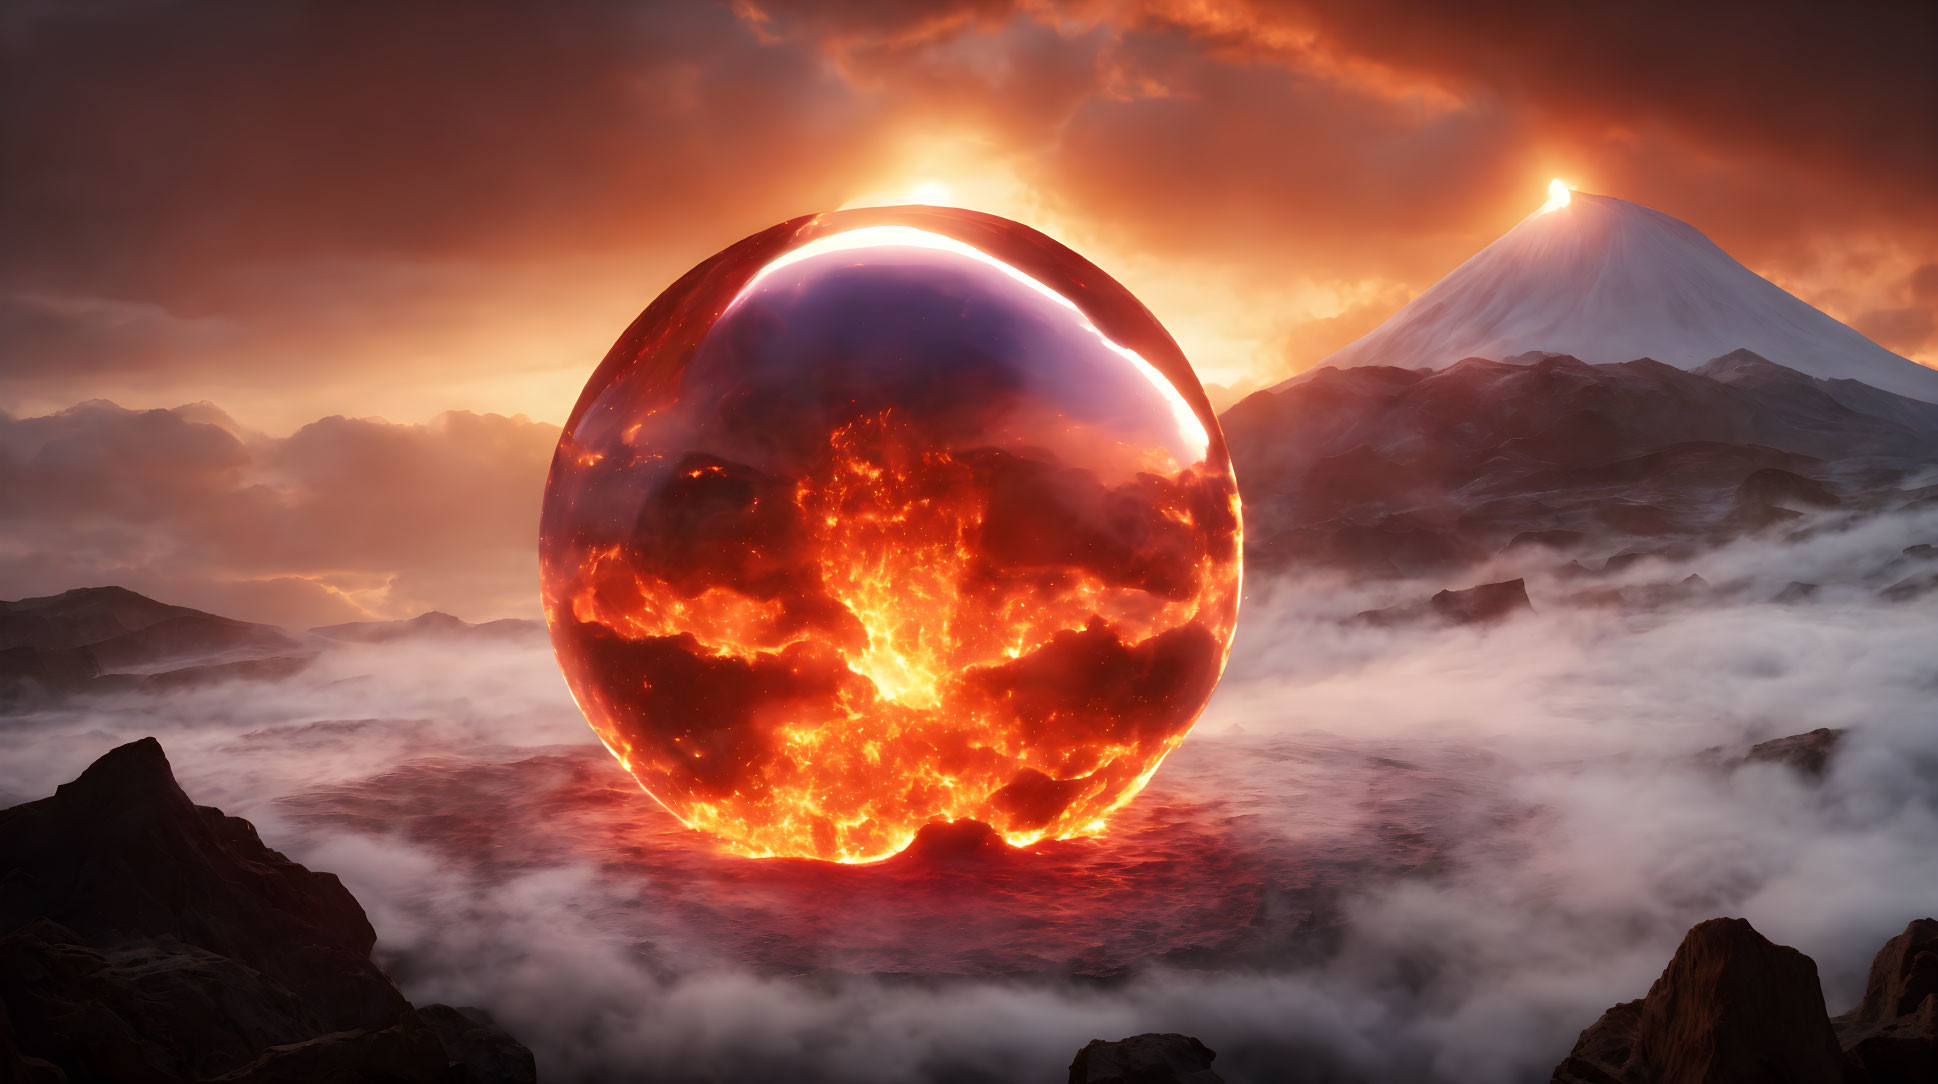 Majestic volcanic landscape with glowing orb and misty mountain